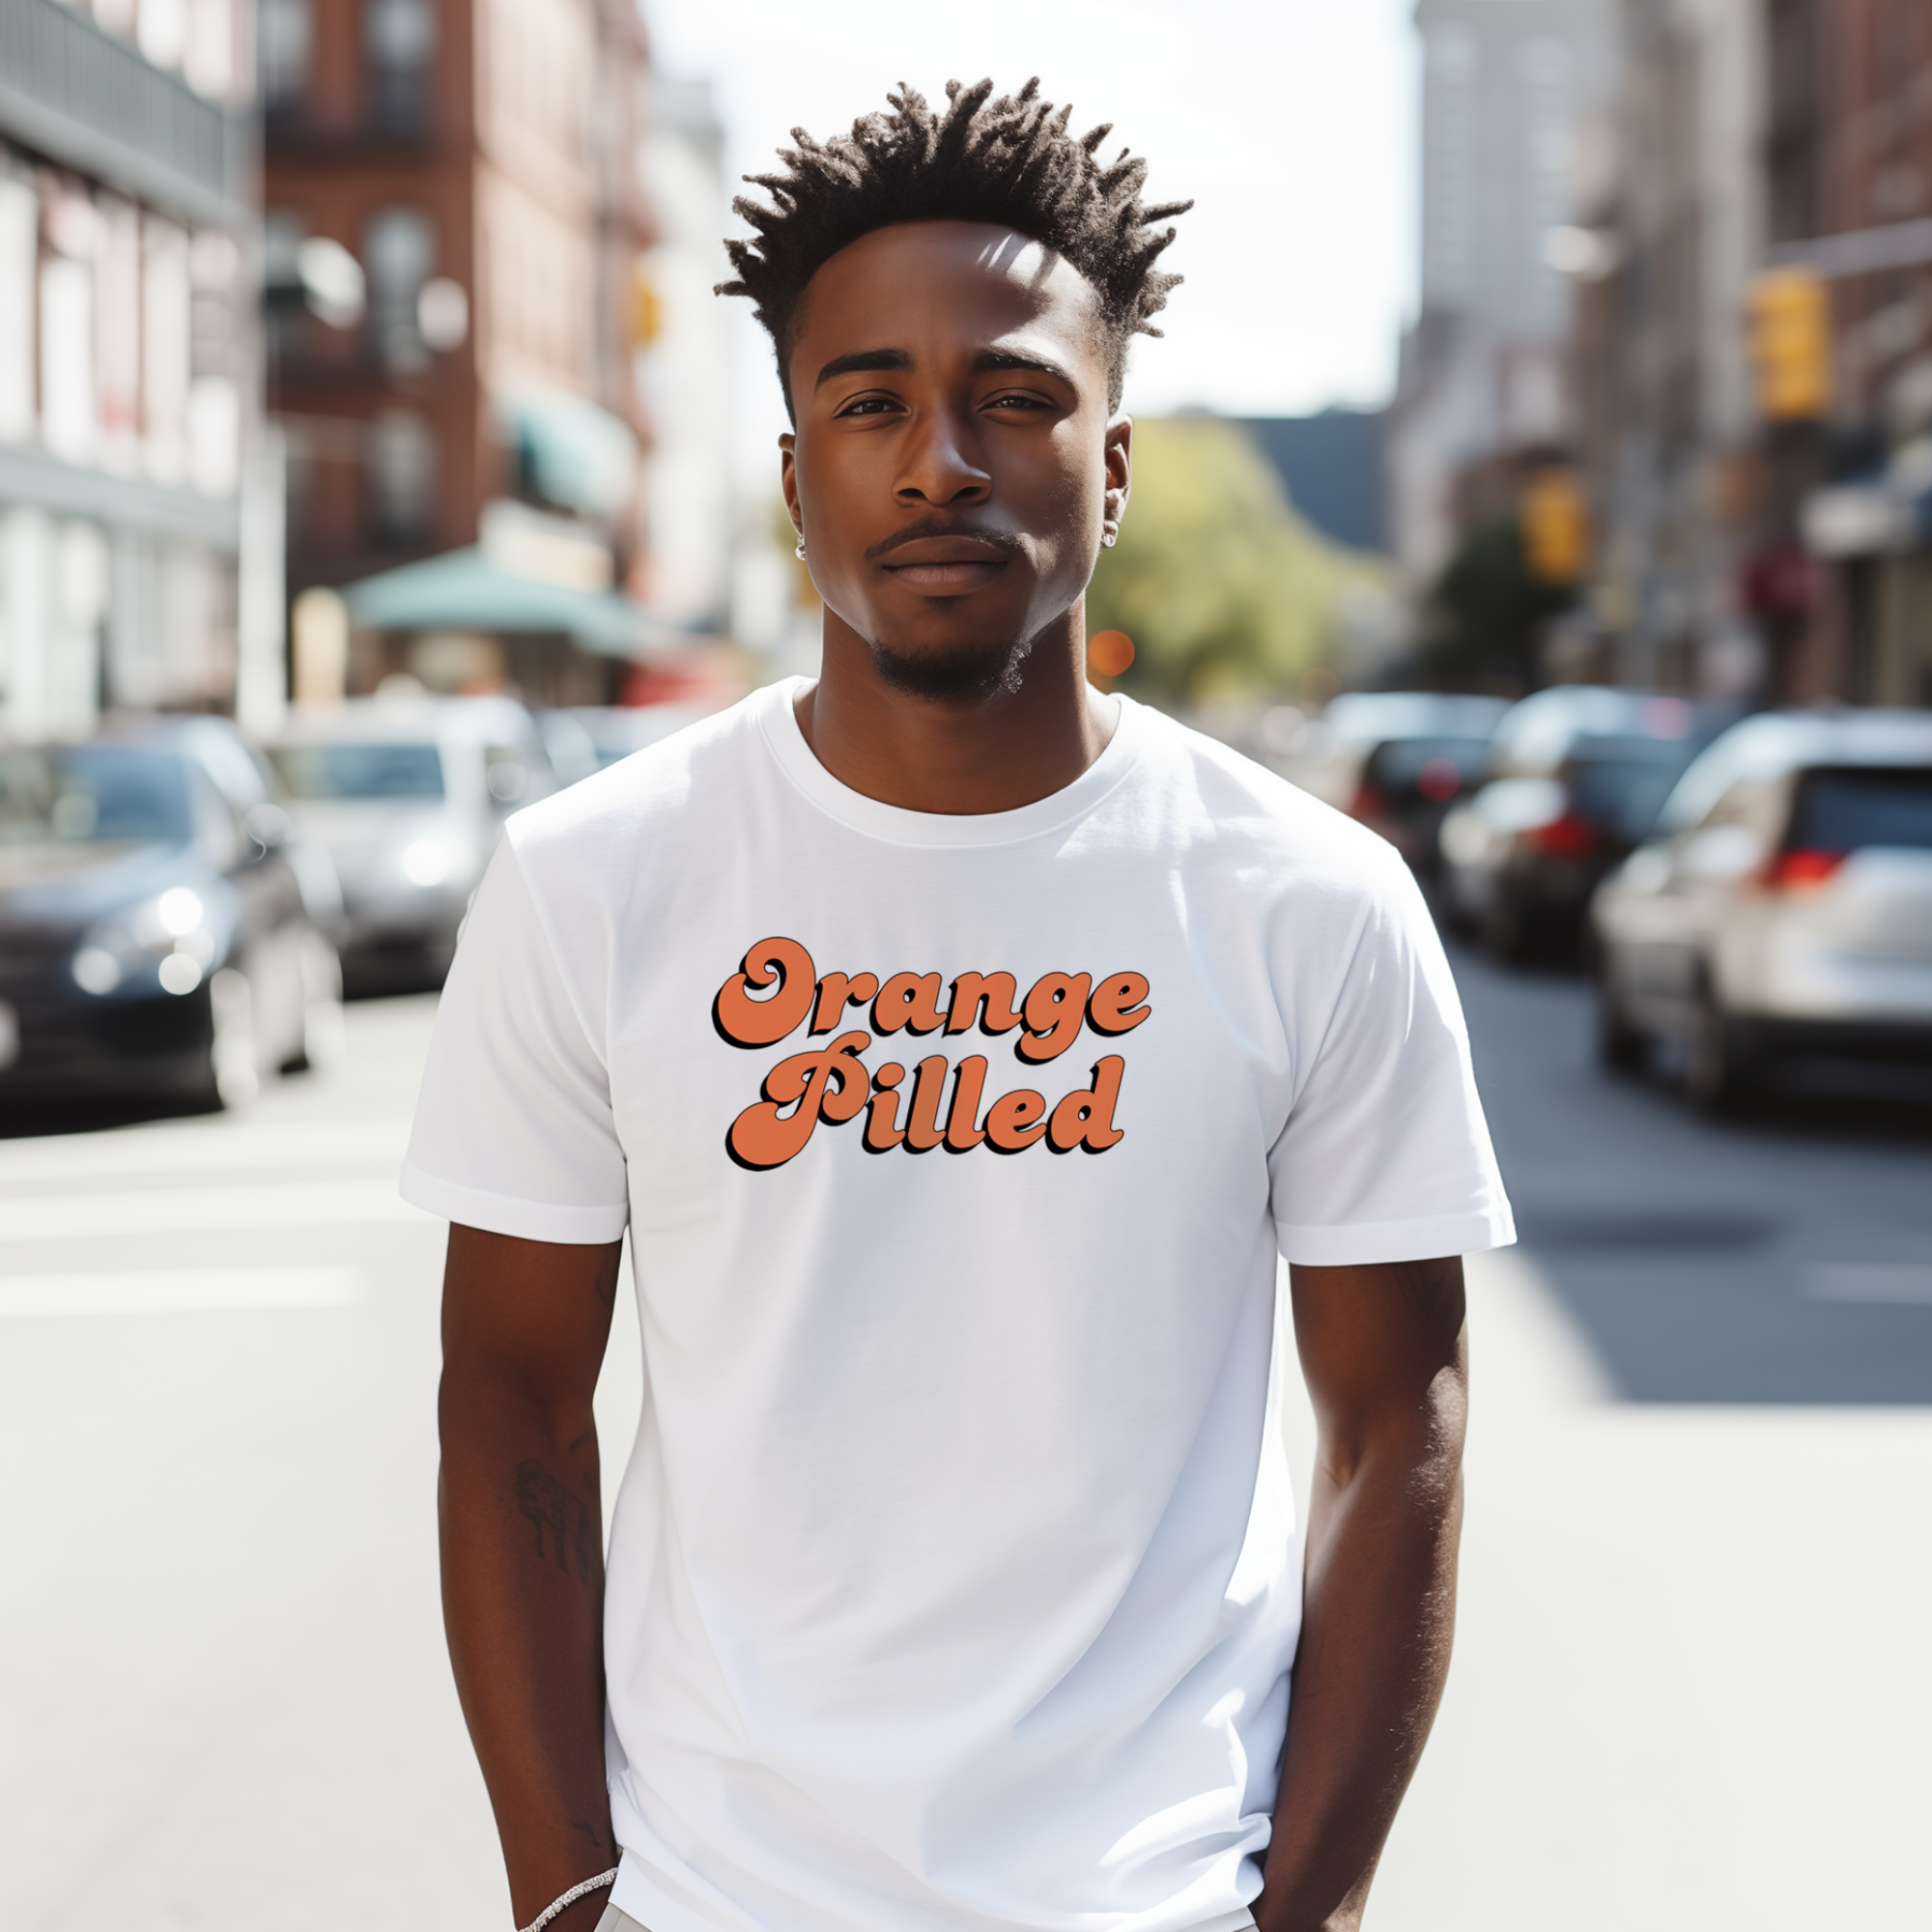 Bitcoin-themed clothing: Orange Pilled Tee worn by male model. Front view.